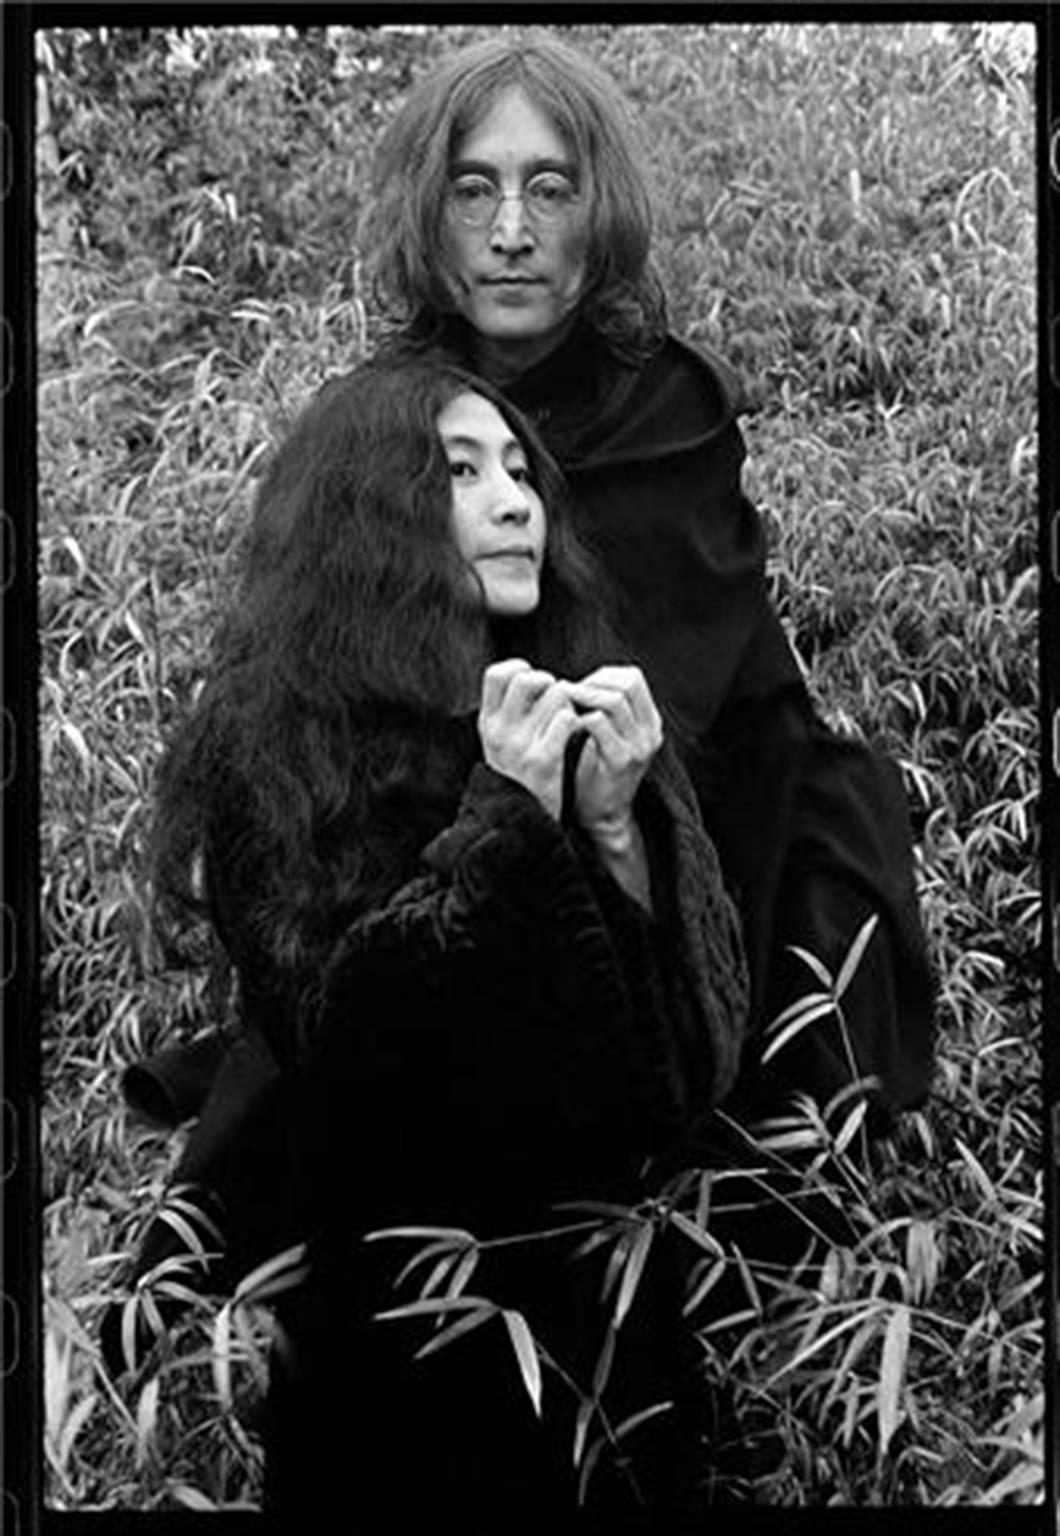 Ethan Russell Black and White Photograph - John Lennon and Yoko Ono